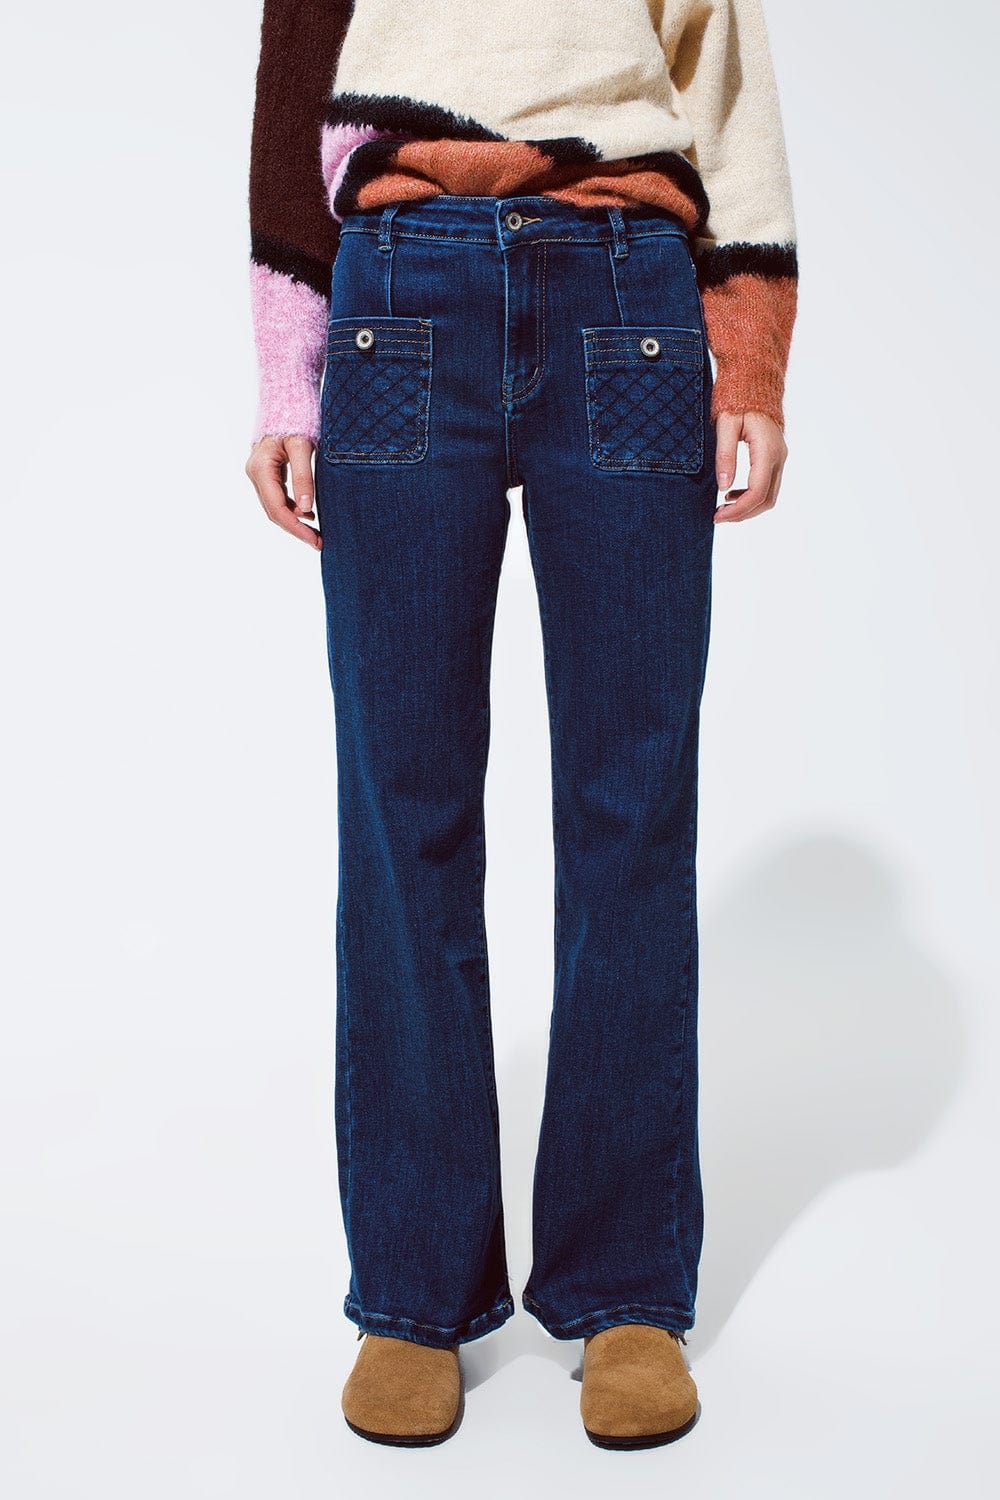 Q2 Women's Jean Blue Jeans With Buttoned Pocket Details In Dark Wash